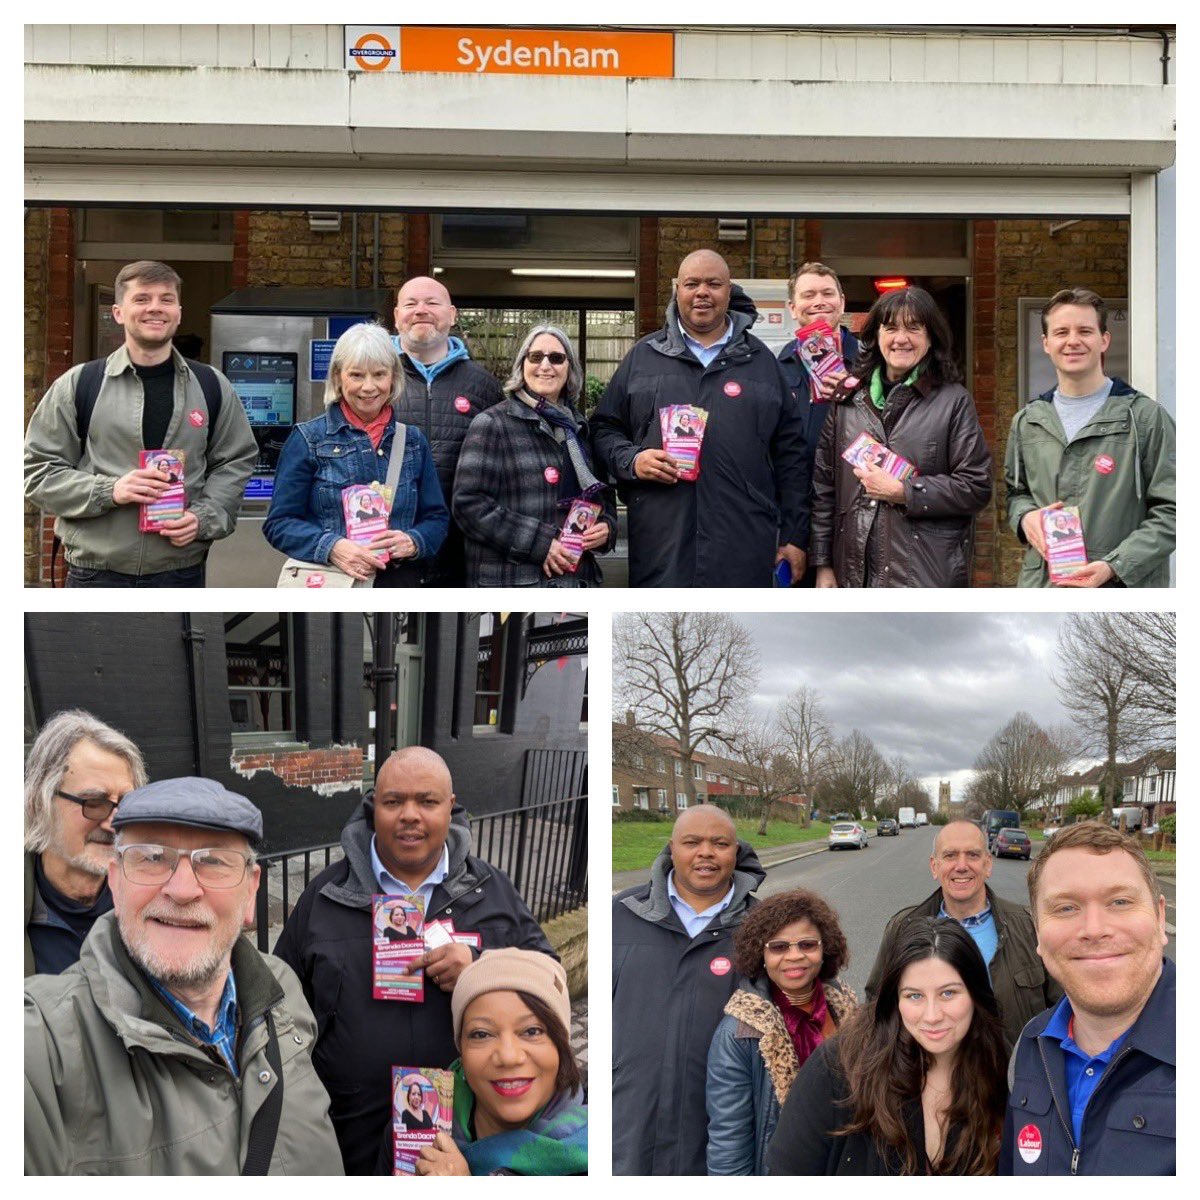 What a fantastic day engaging with Lewisham Residents! Huge thanks to everyone who shared their thoughts with me, @JanetDaby, @Len_Duvall, #Lewisham Councillors & #Labour Members. Let's make a difference together. 🗳️Vote @Brenda_Dacres on 7th March #VoteLabour